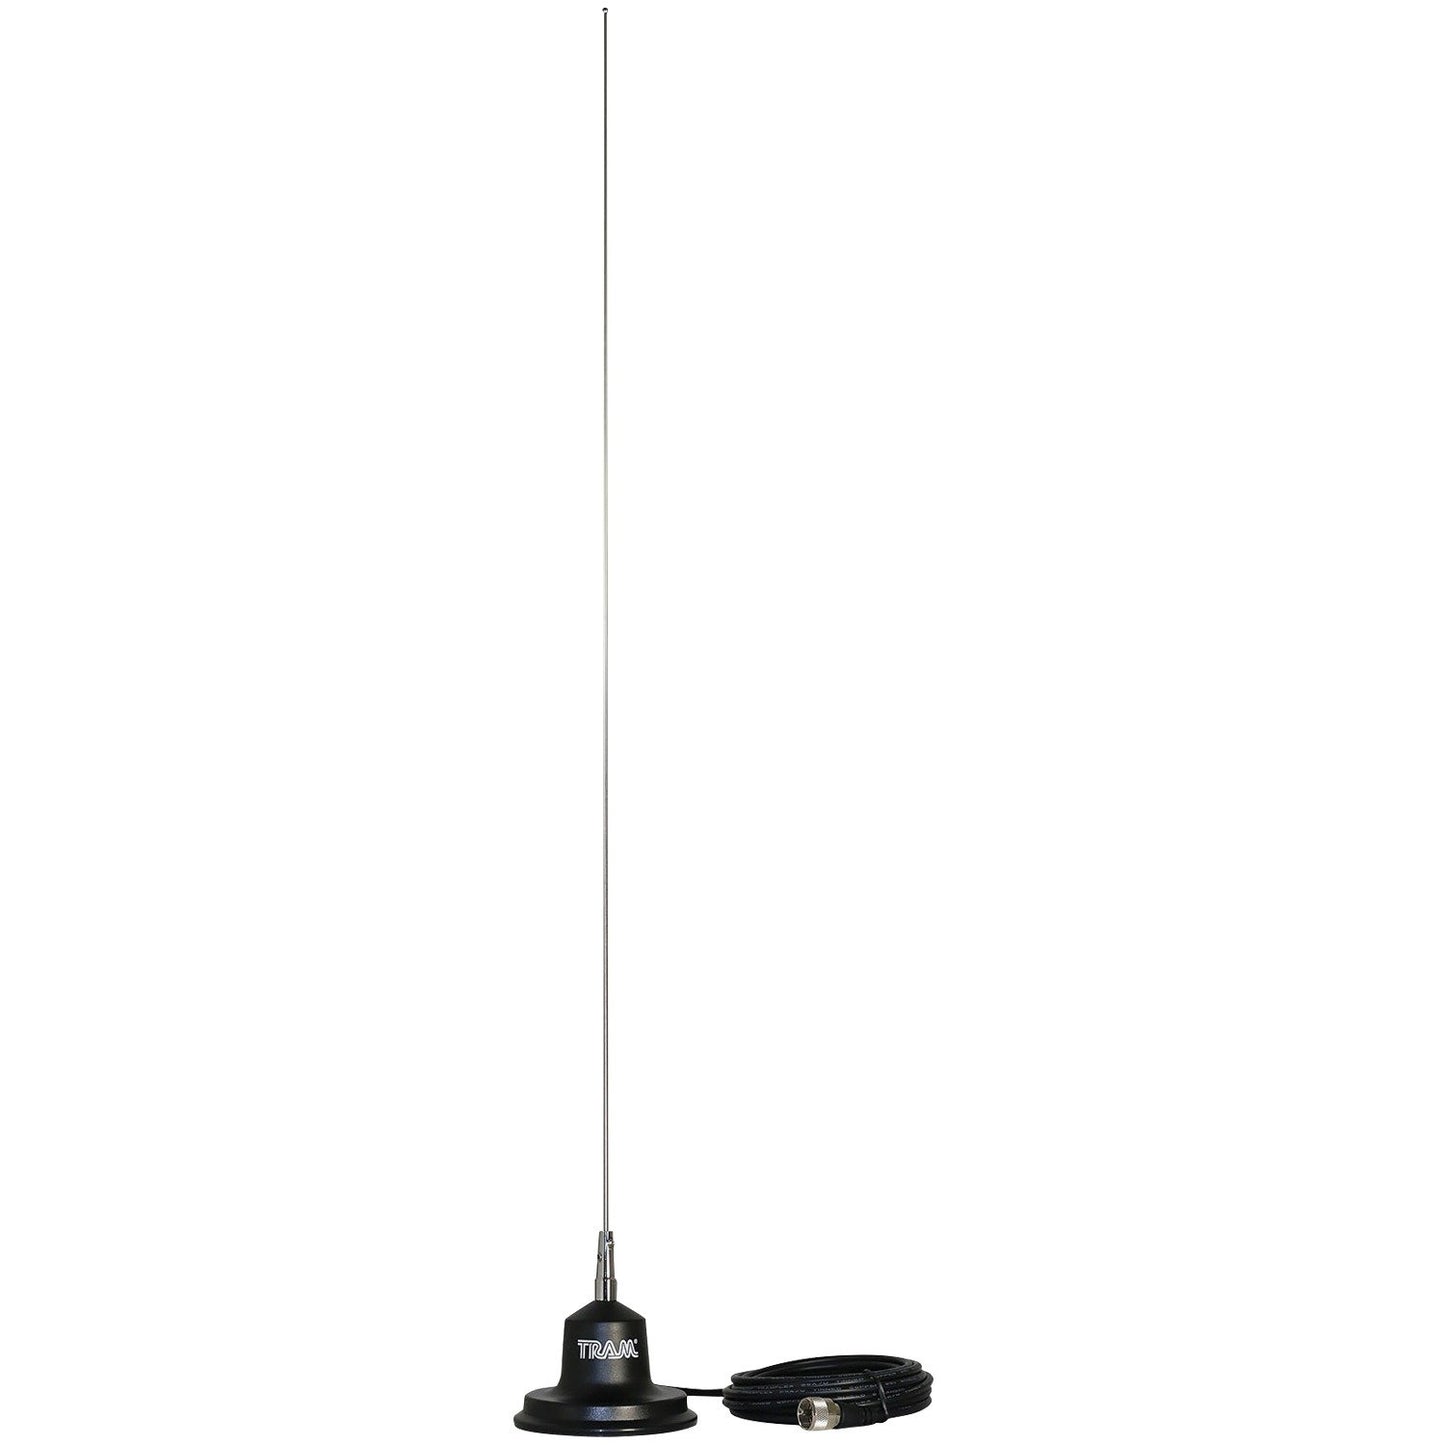 TRAM TRAM300 CB Antenna 4-Inch Magnet Kit with RG58 Coax and Rubber Boot